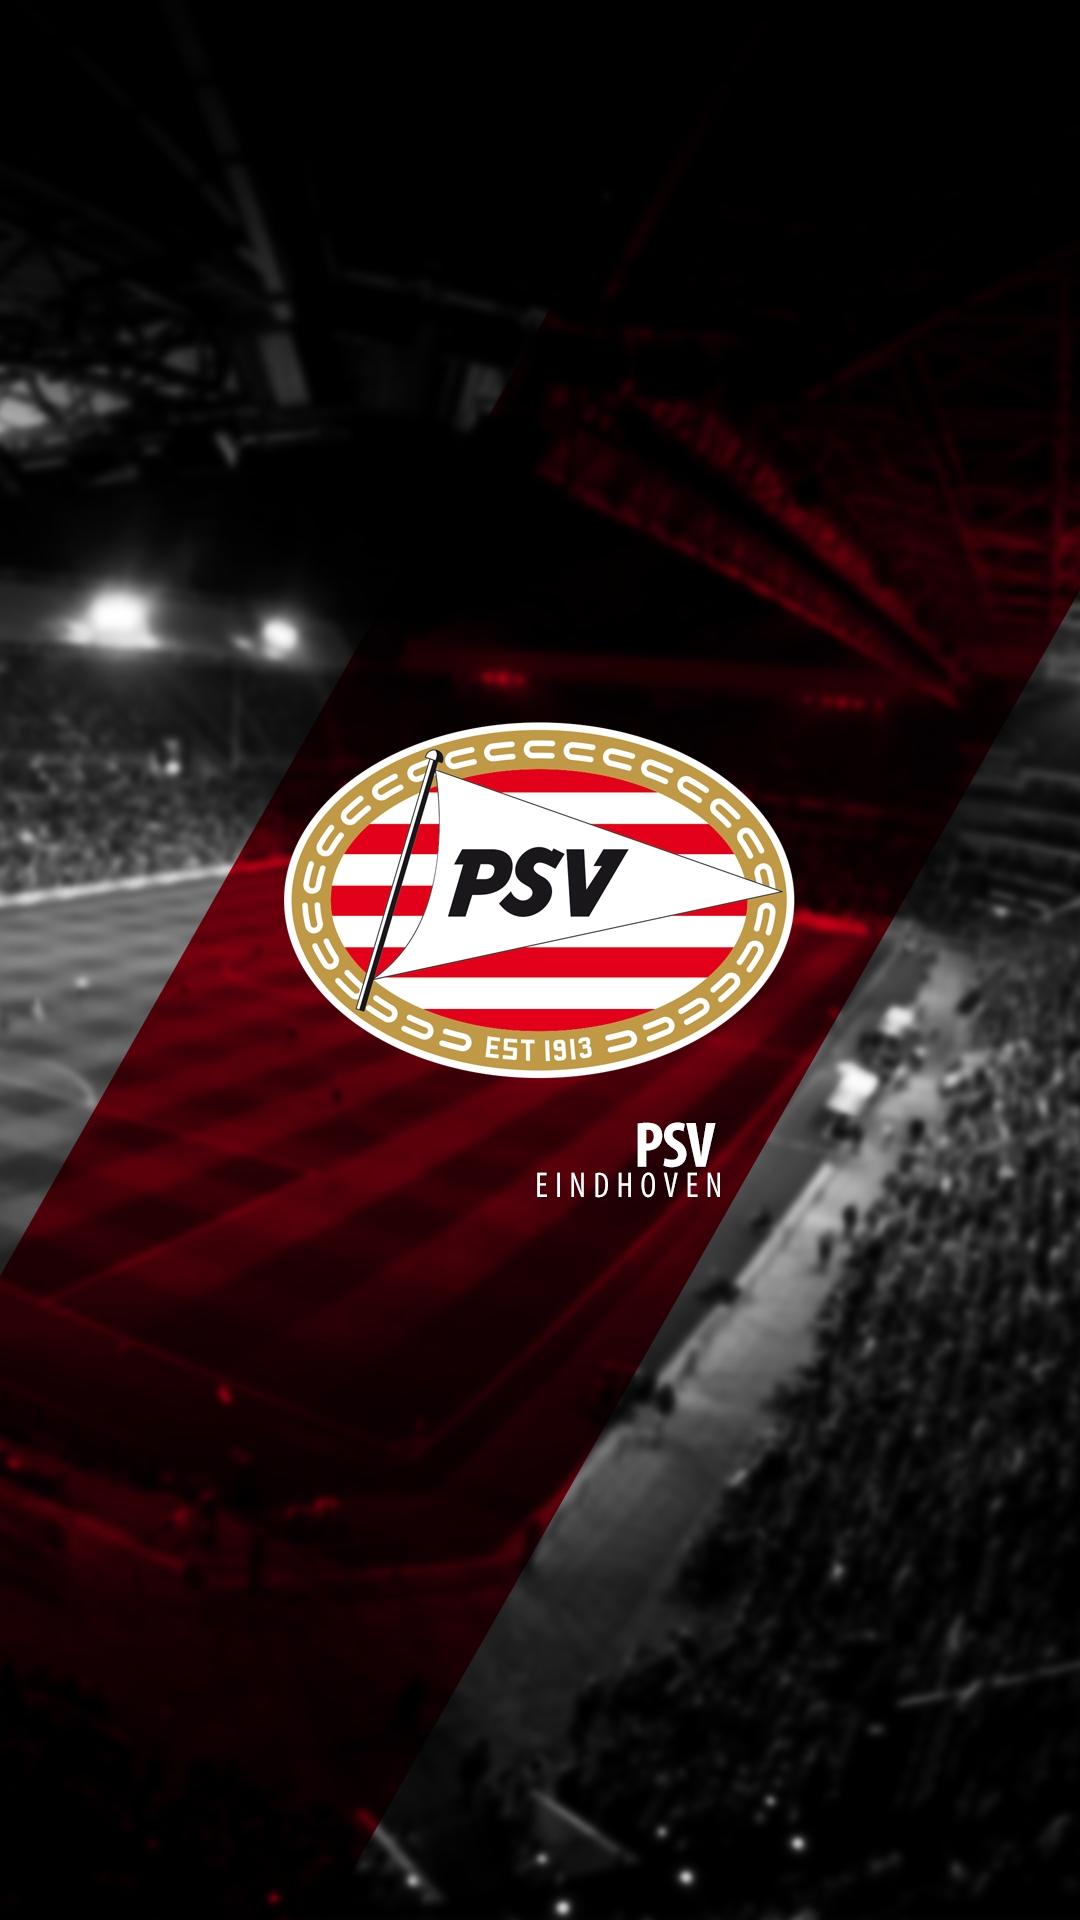 New Psv Wallpaper iPhone. Great Foofball Club